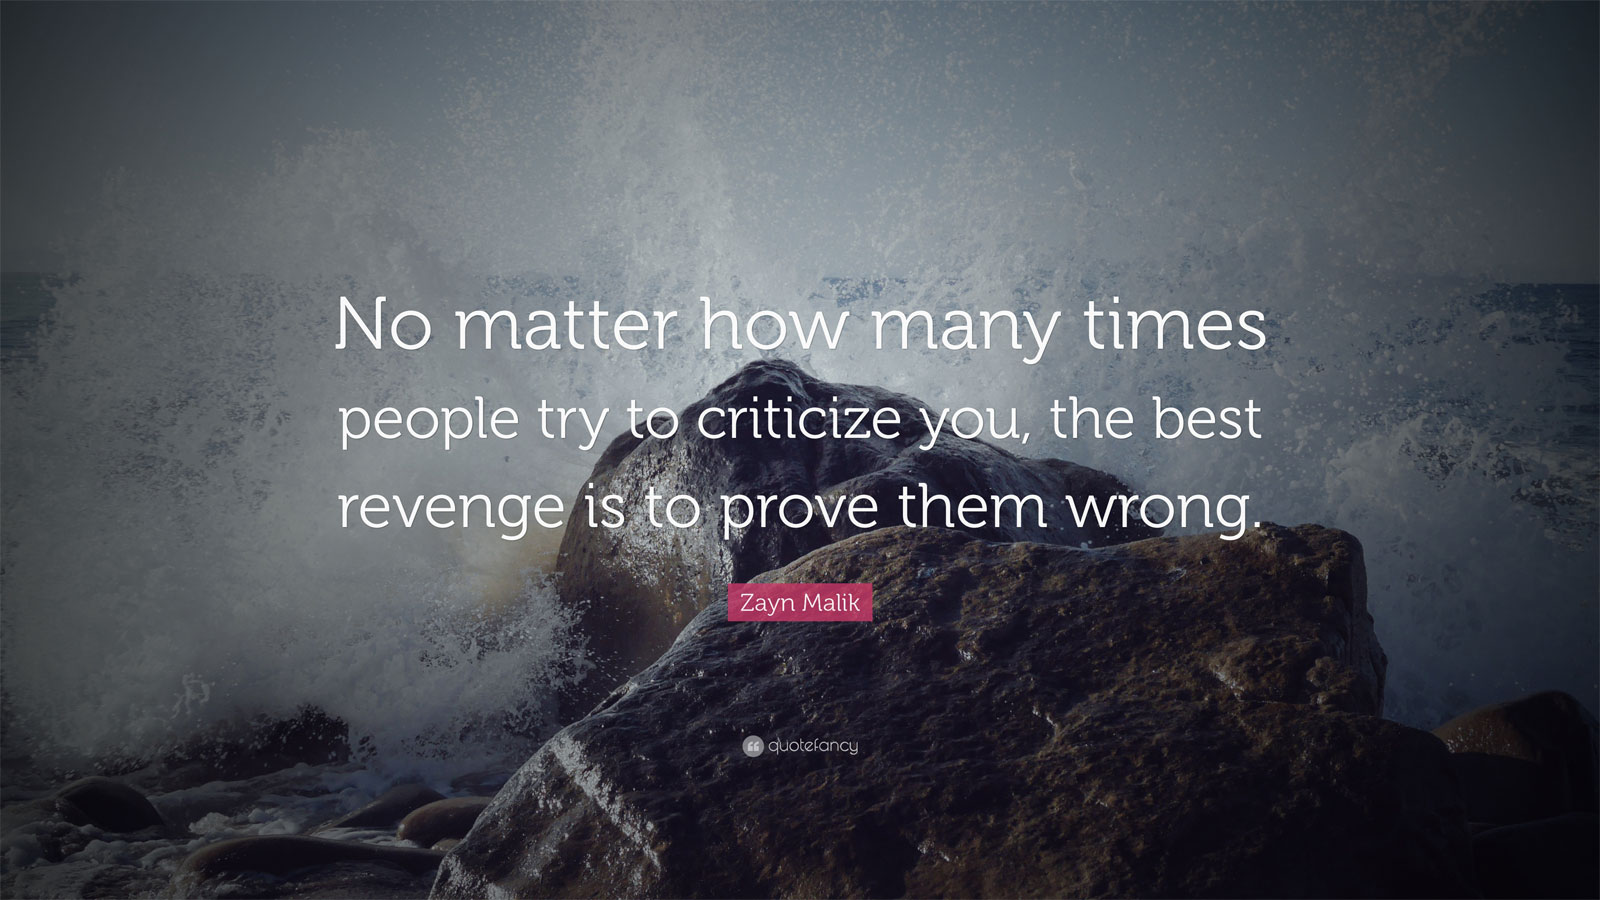 Criticize 115 Best Motivational Wallpaper Examples with Inspiring Quotes